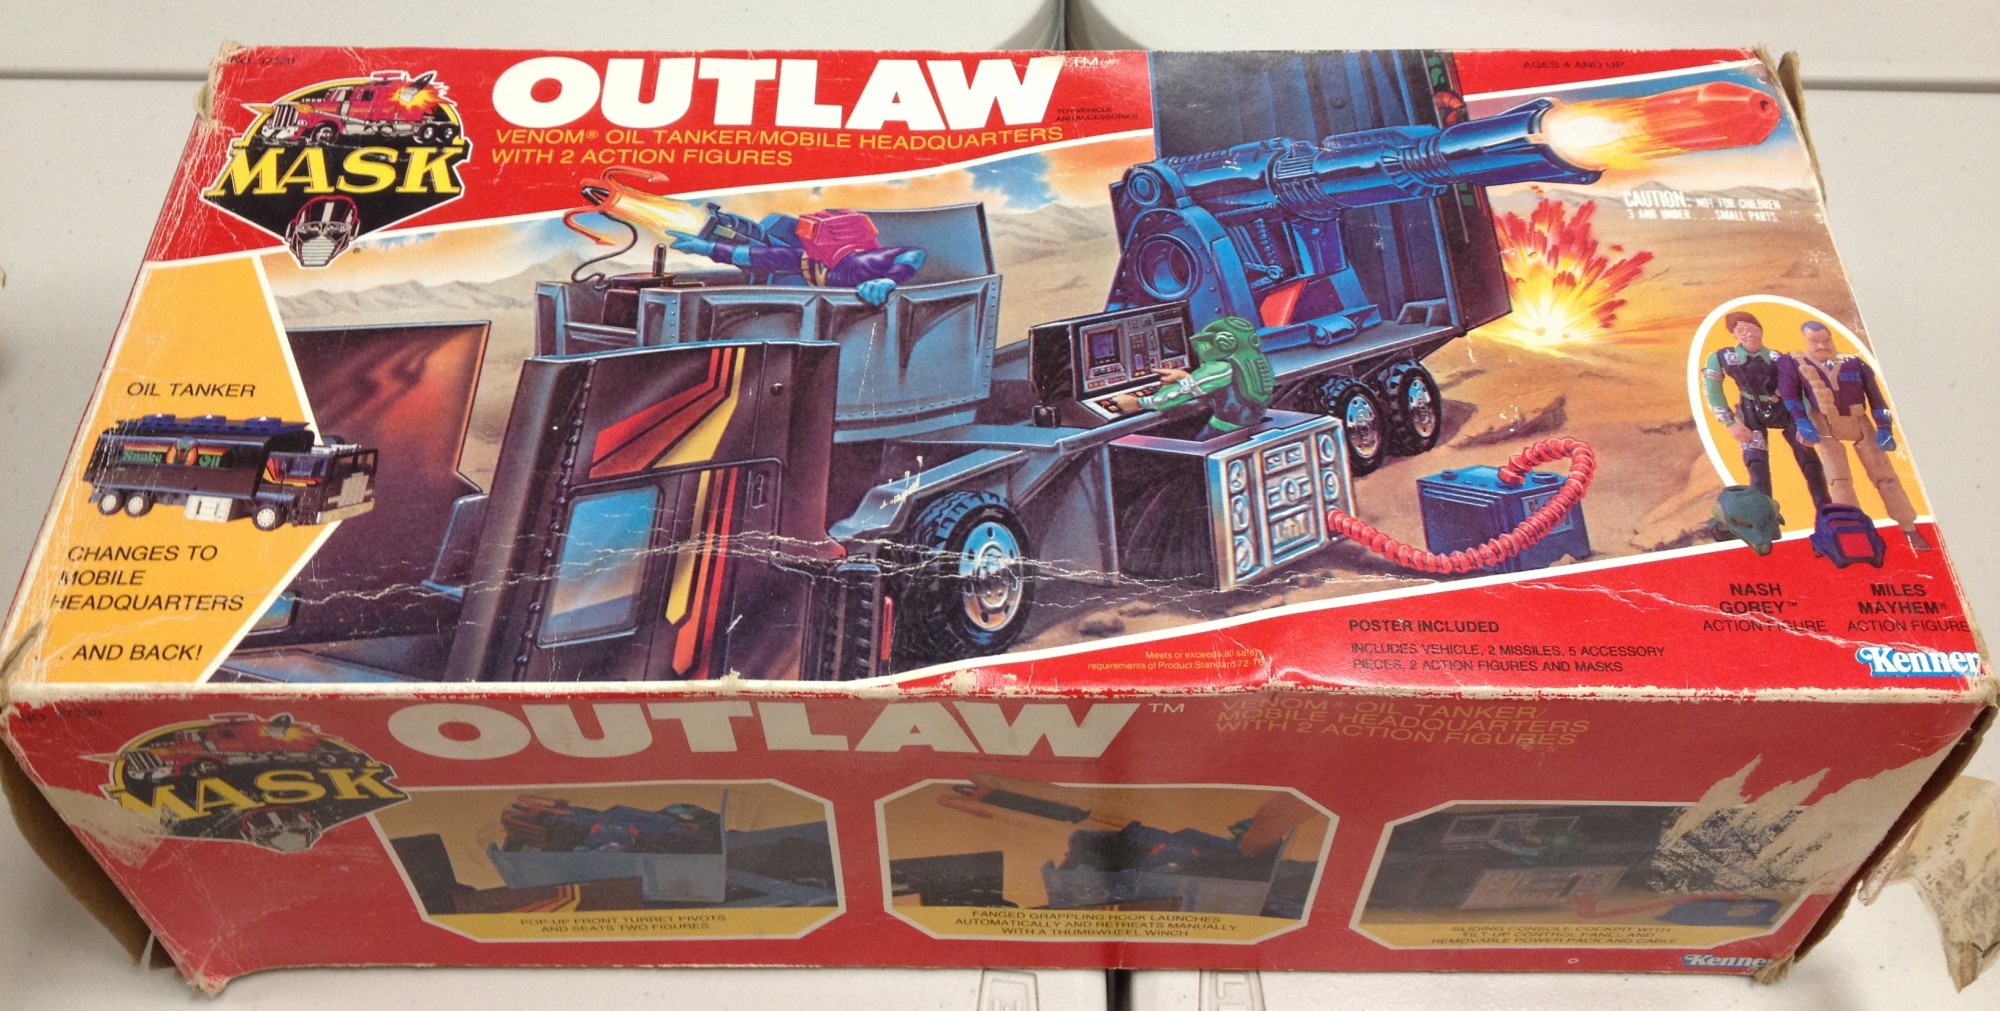 Boxed MASK Outlaw Vehicle